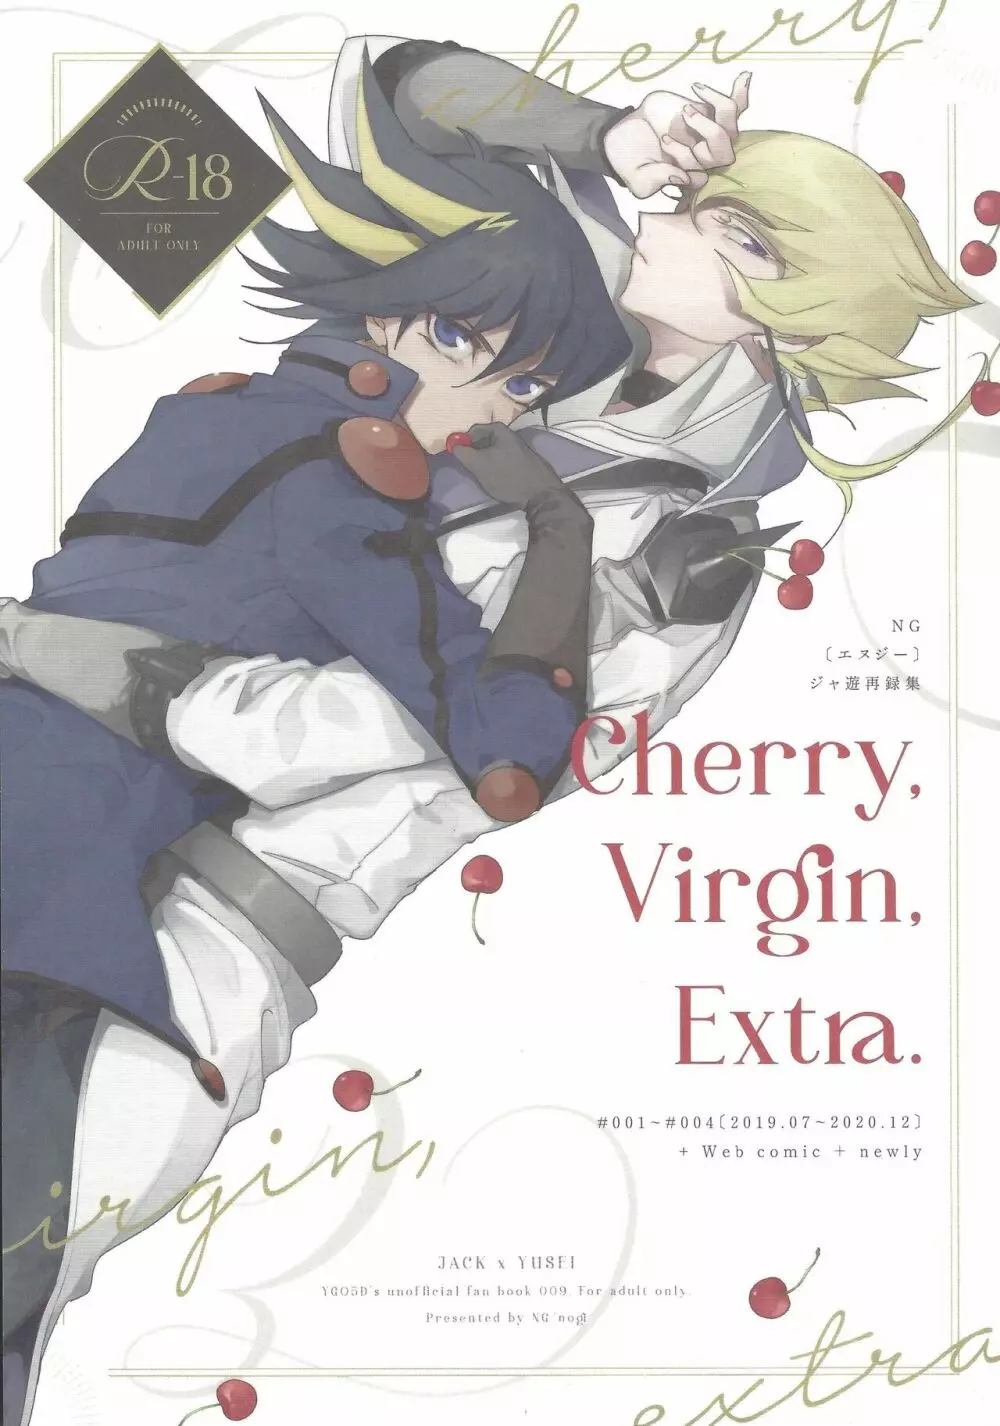 Cherry, Virgin, Extra. - page1